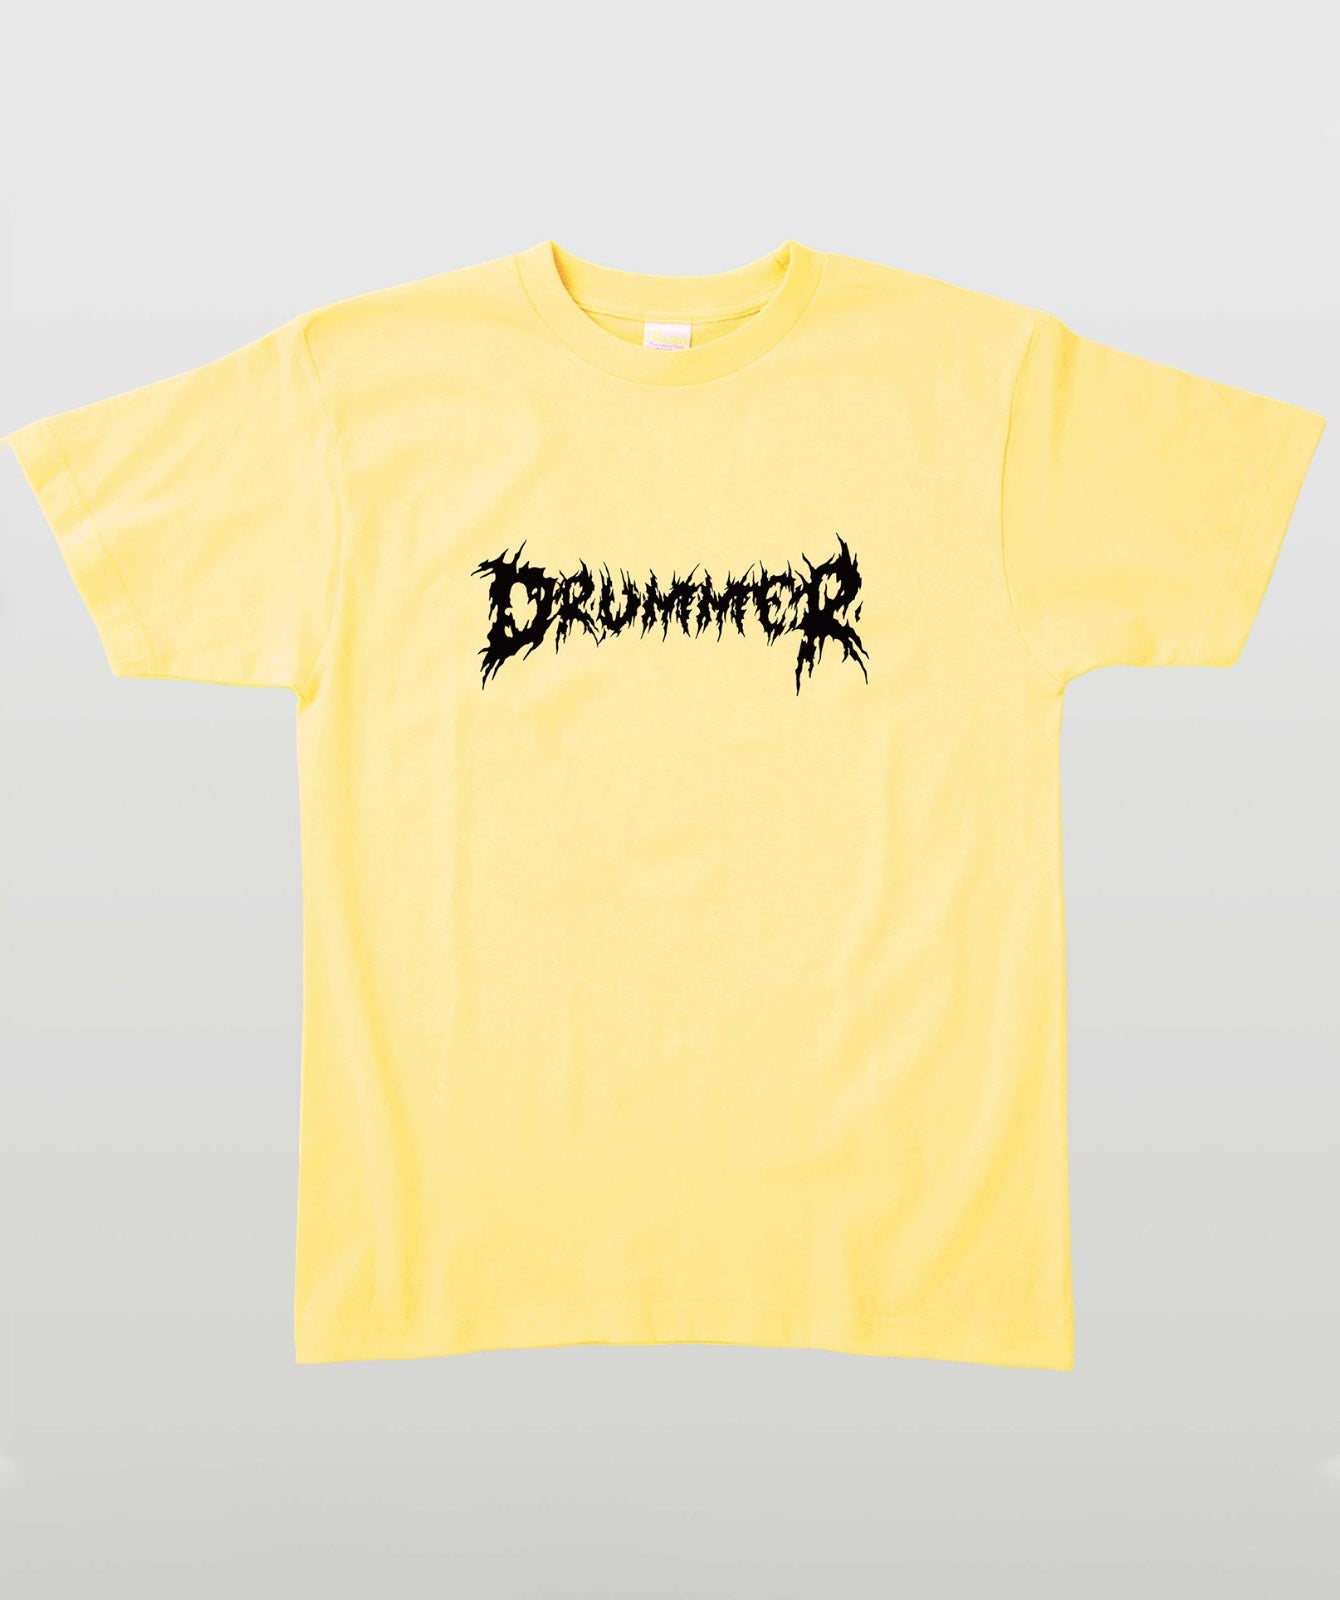 MS PLAYER SERIES ～DRUMMER Type H～